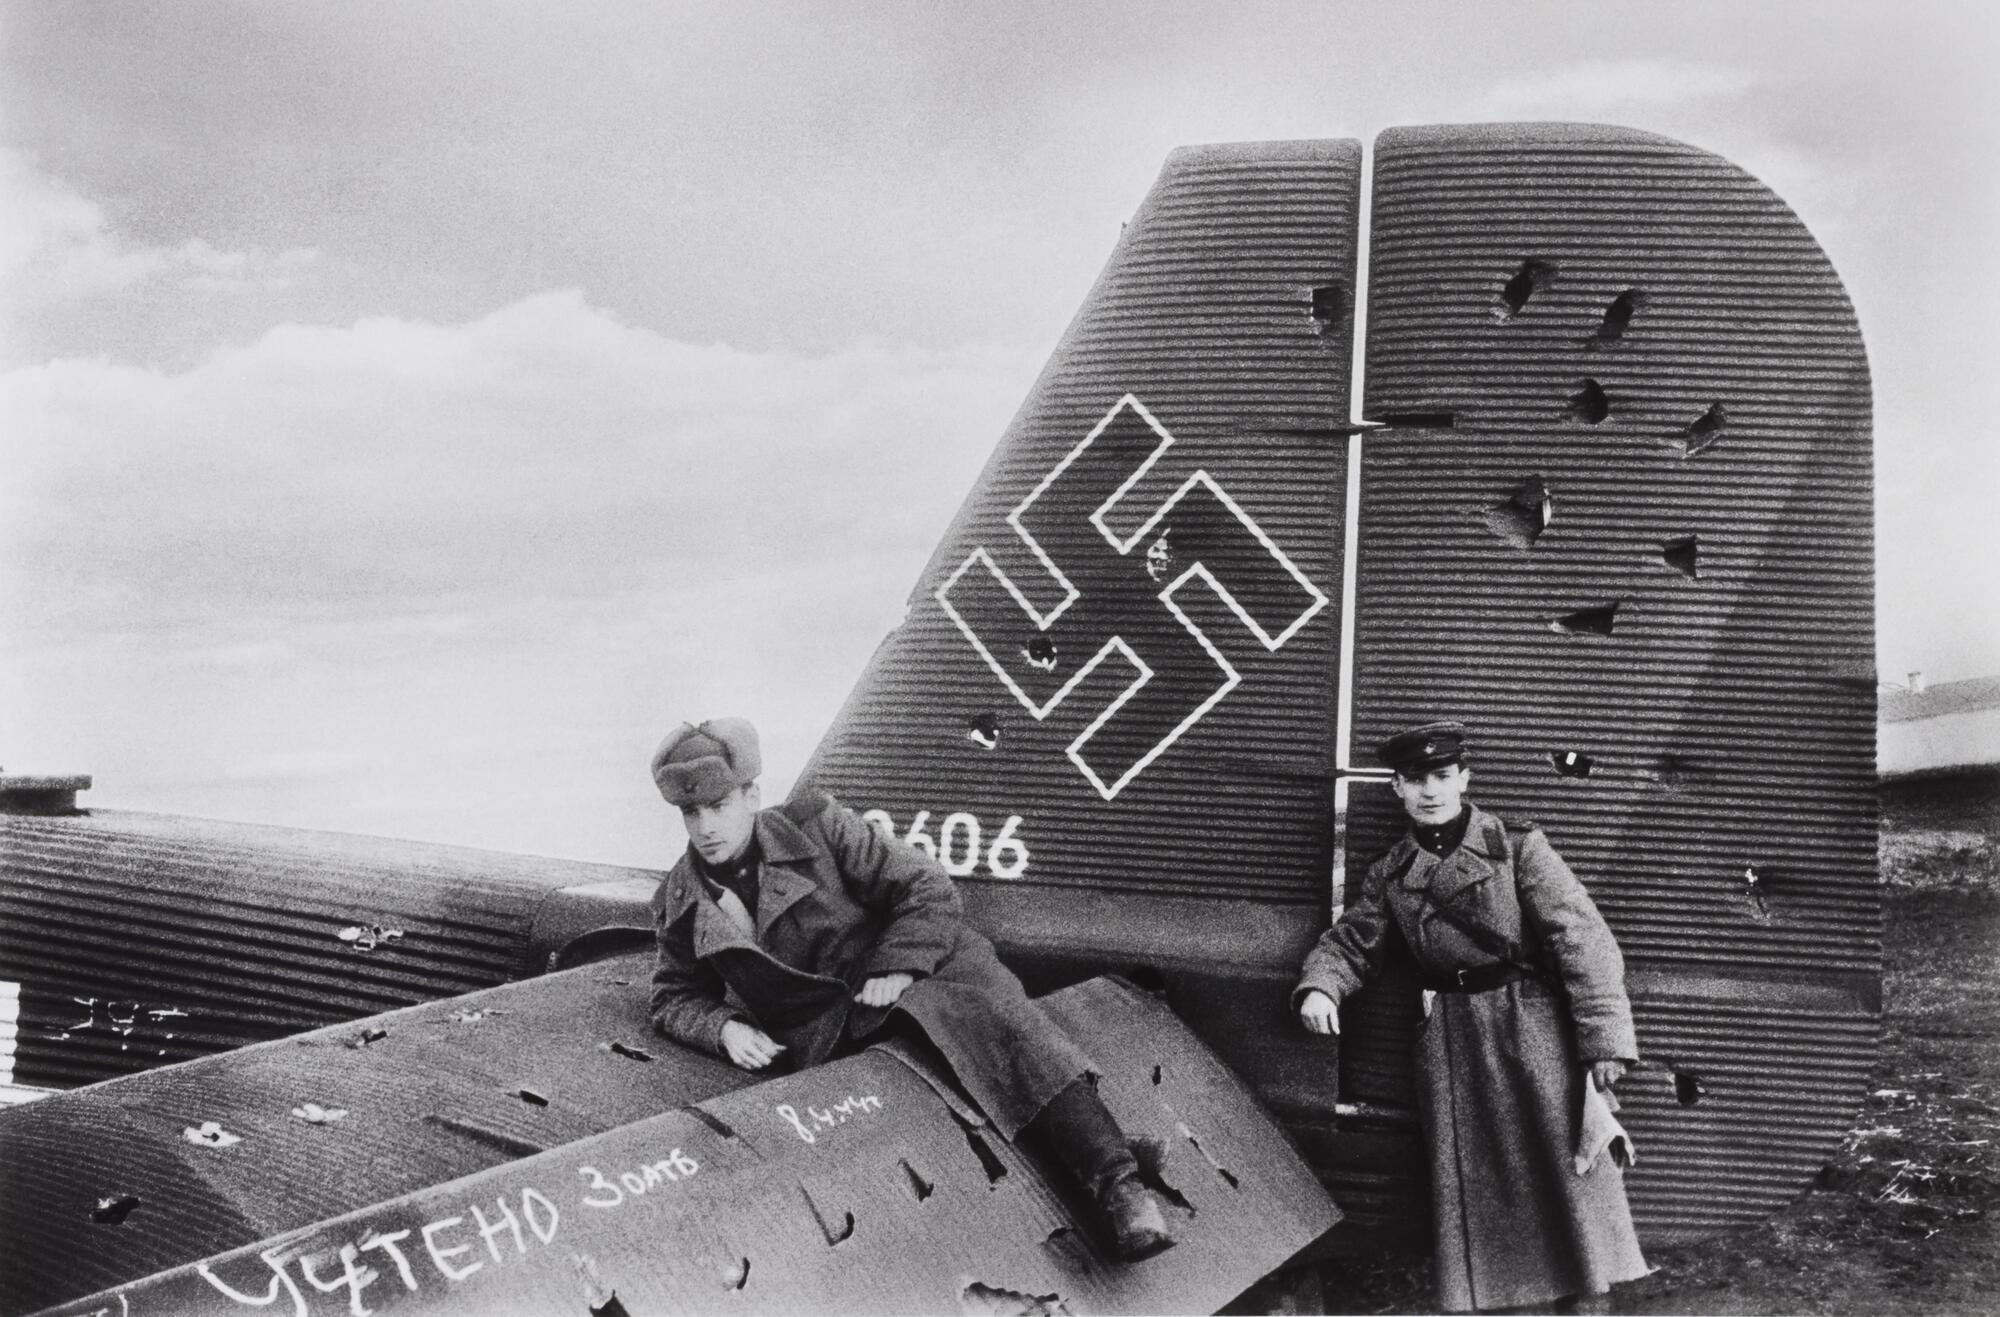 Two Soviet soldiers pose with a captured and heavily damaged Nazi warplane.